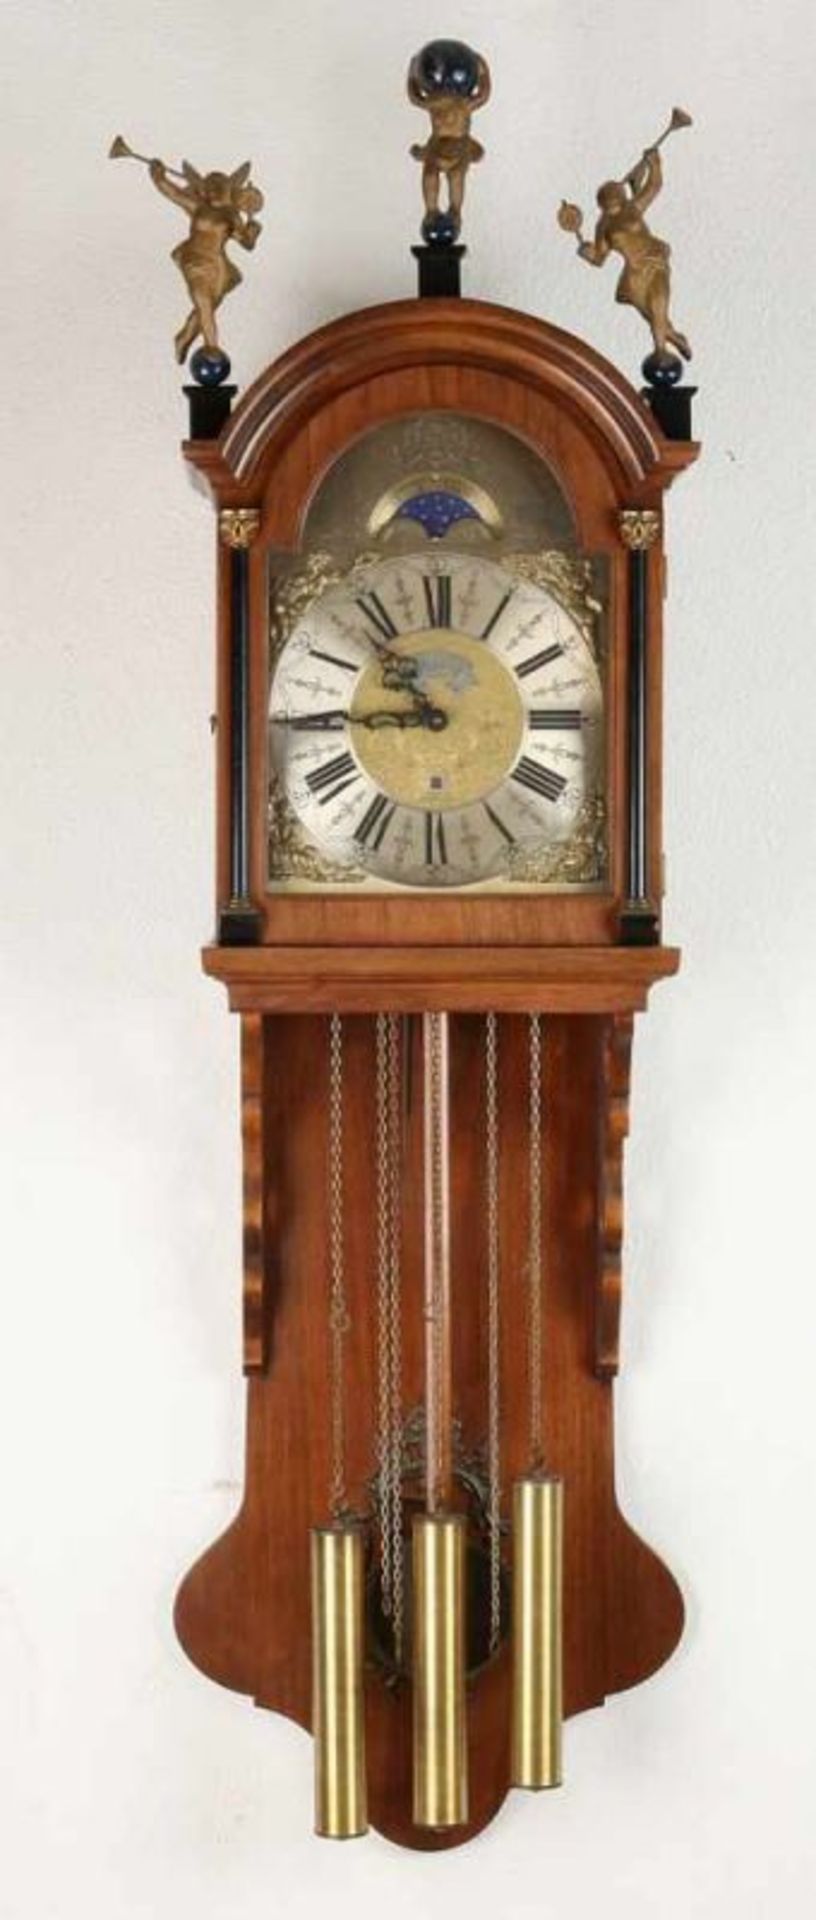 Westminster Frisian clock quarter striking, date display and moon phase. Walnut. Second half 20th